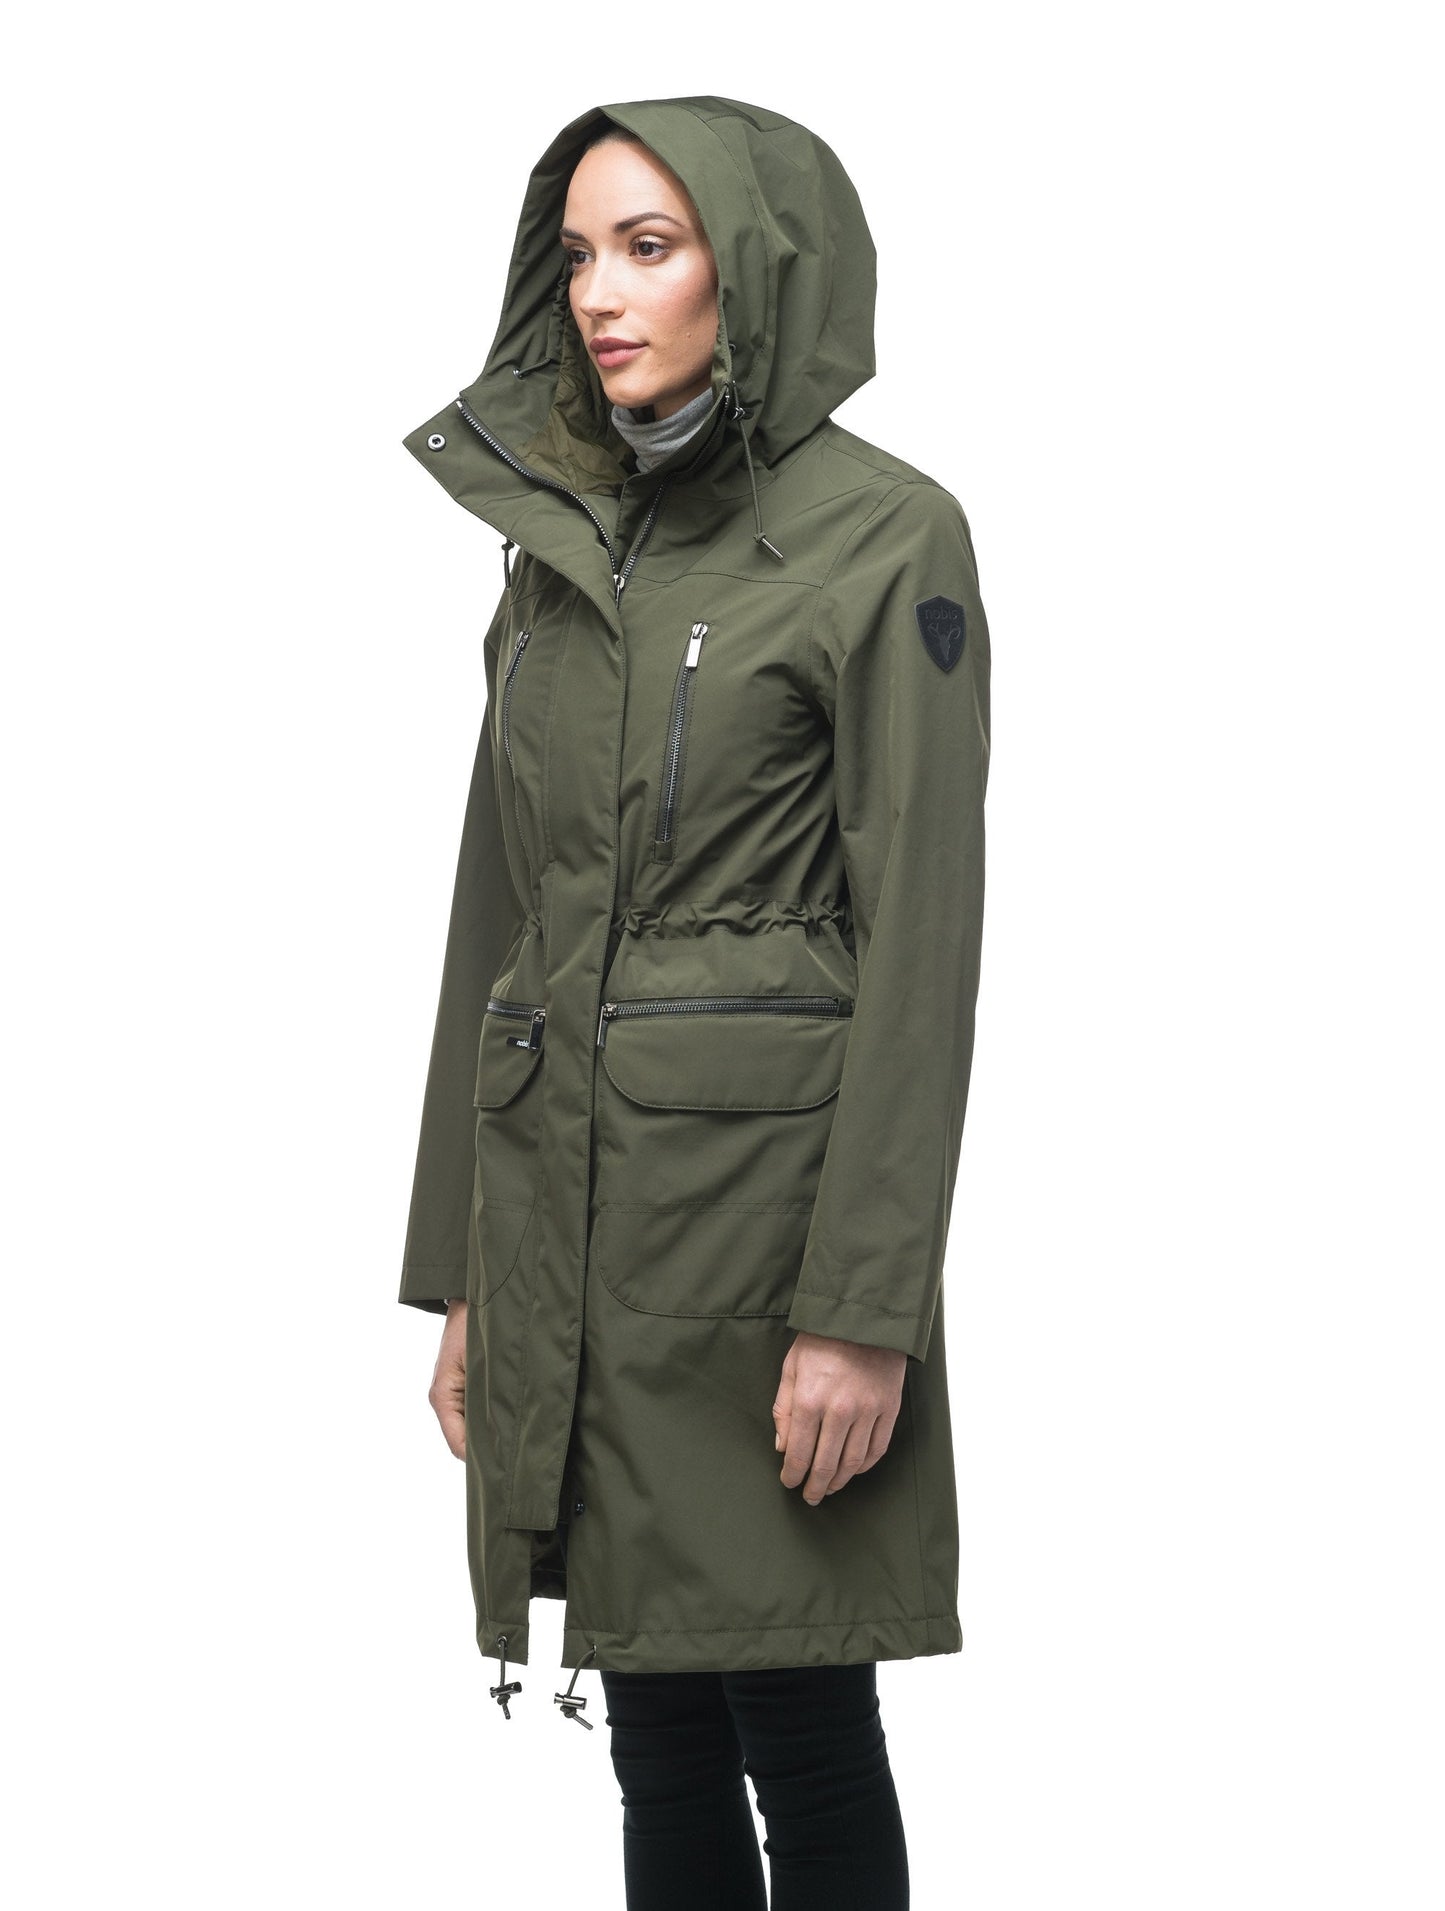 Women's knee length anorak with four front pockets and adjustable cord waist in Fatigue